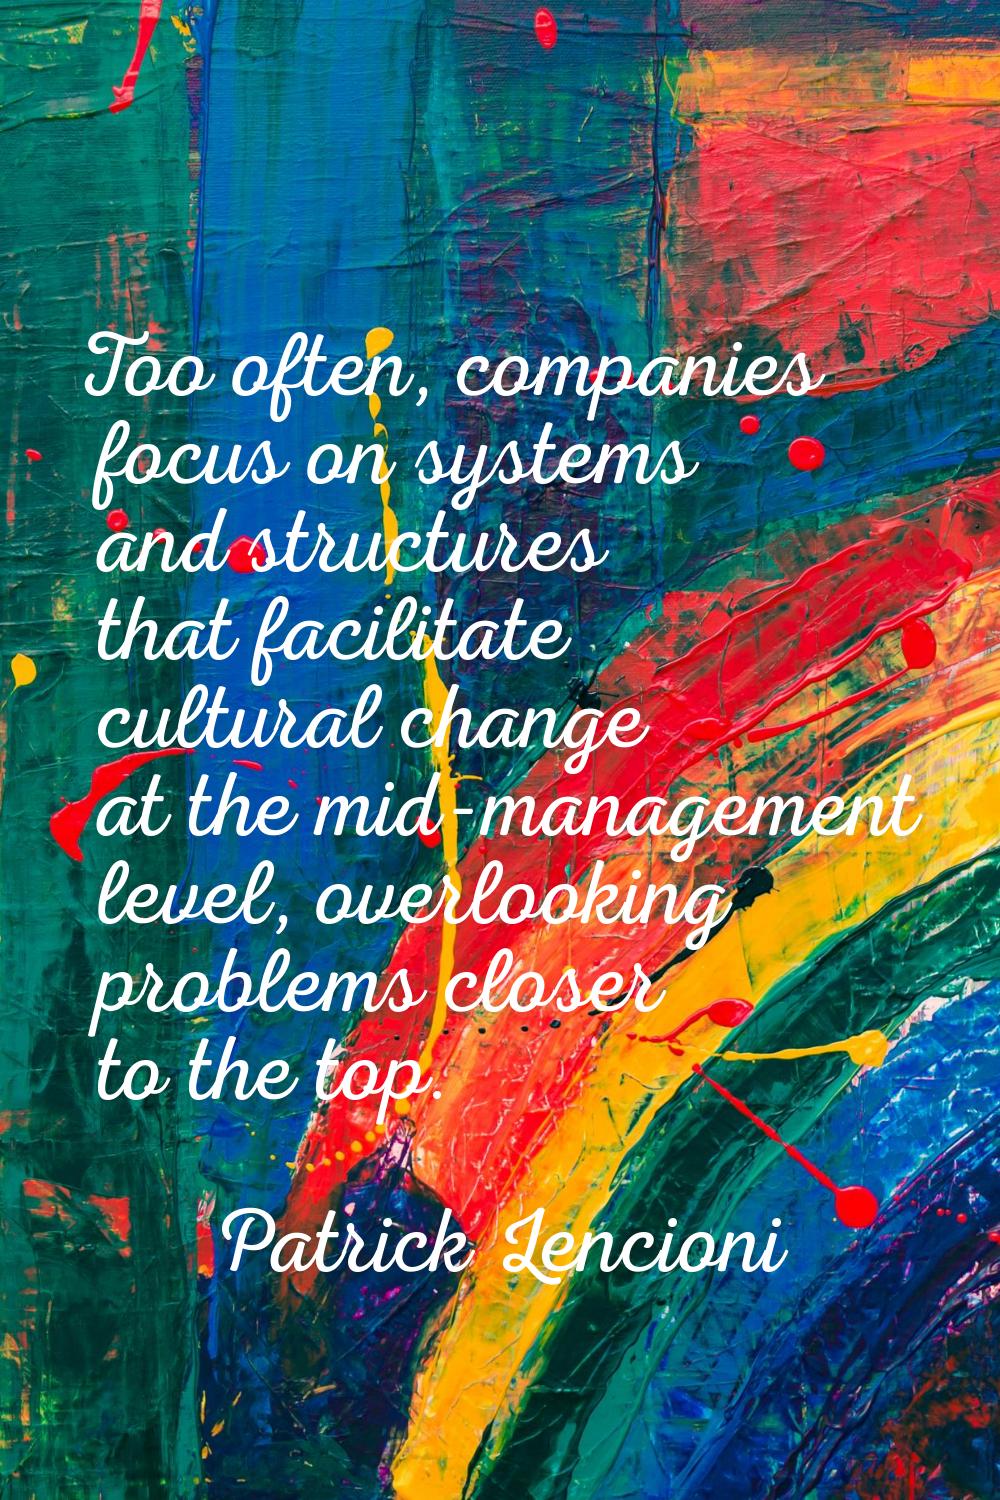 Too often, companies focus on systems and structures that facilitate cultural change at the mid-man